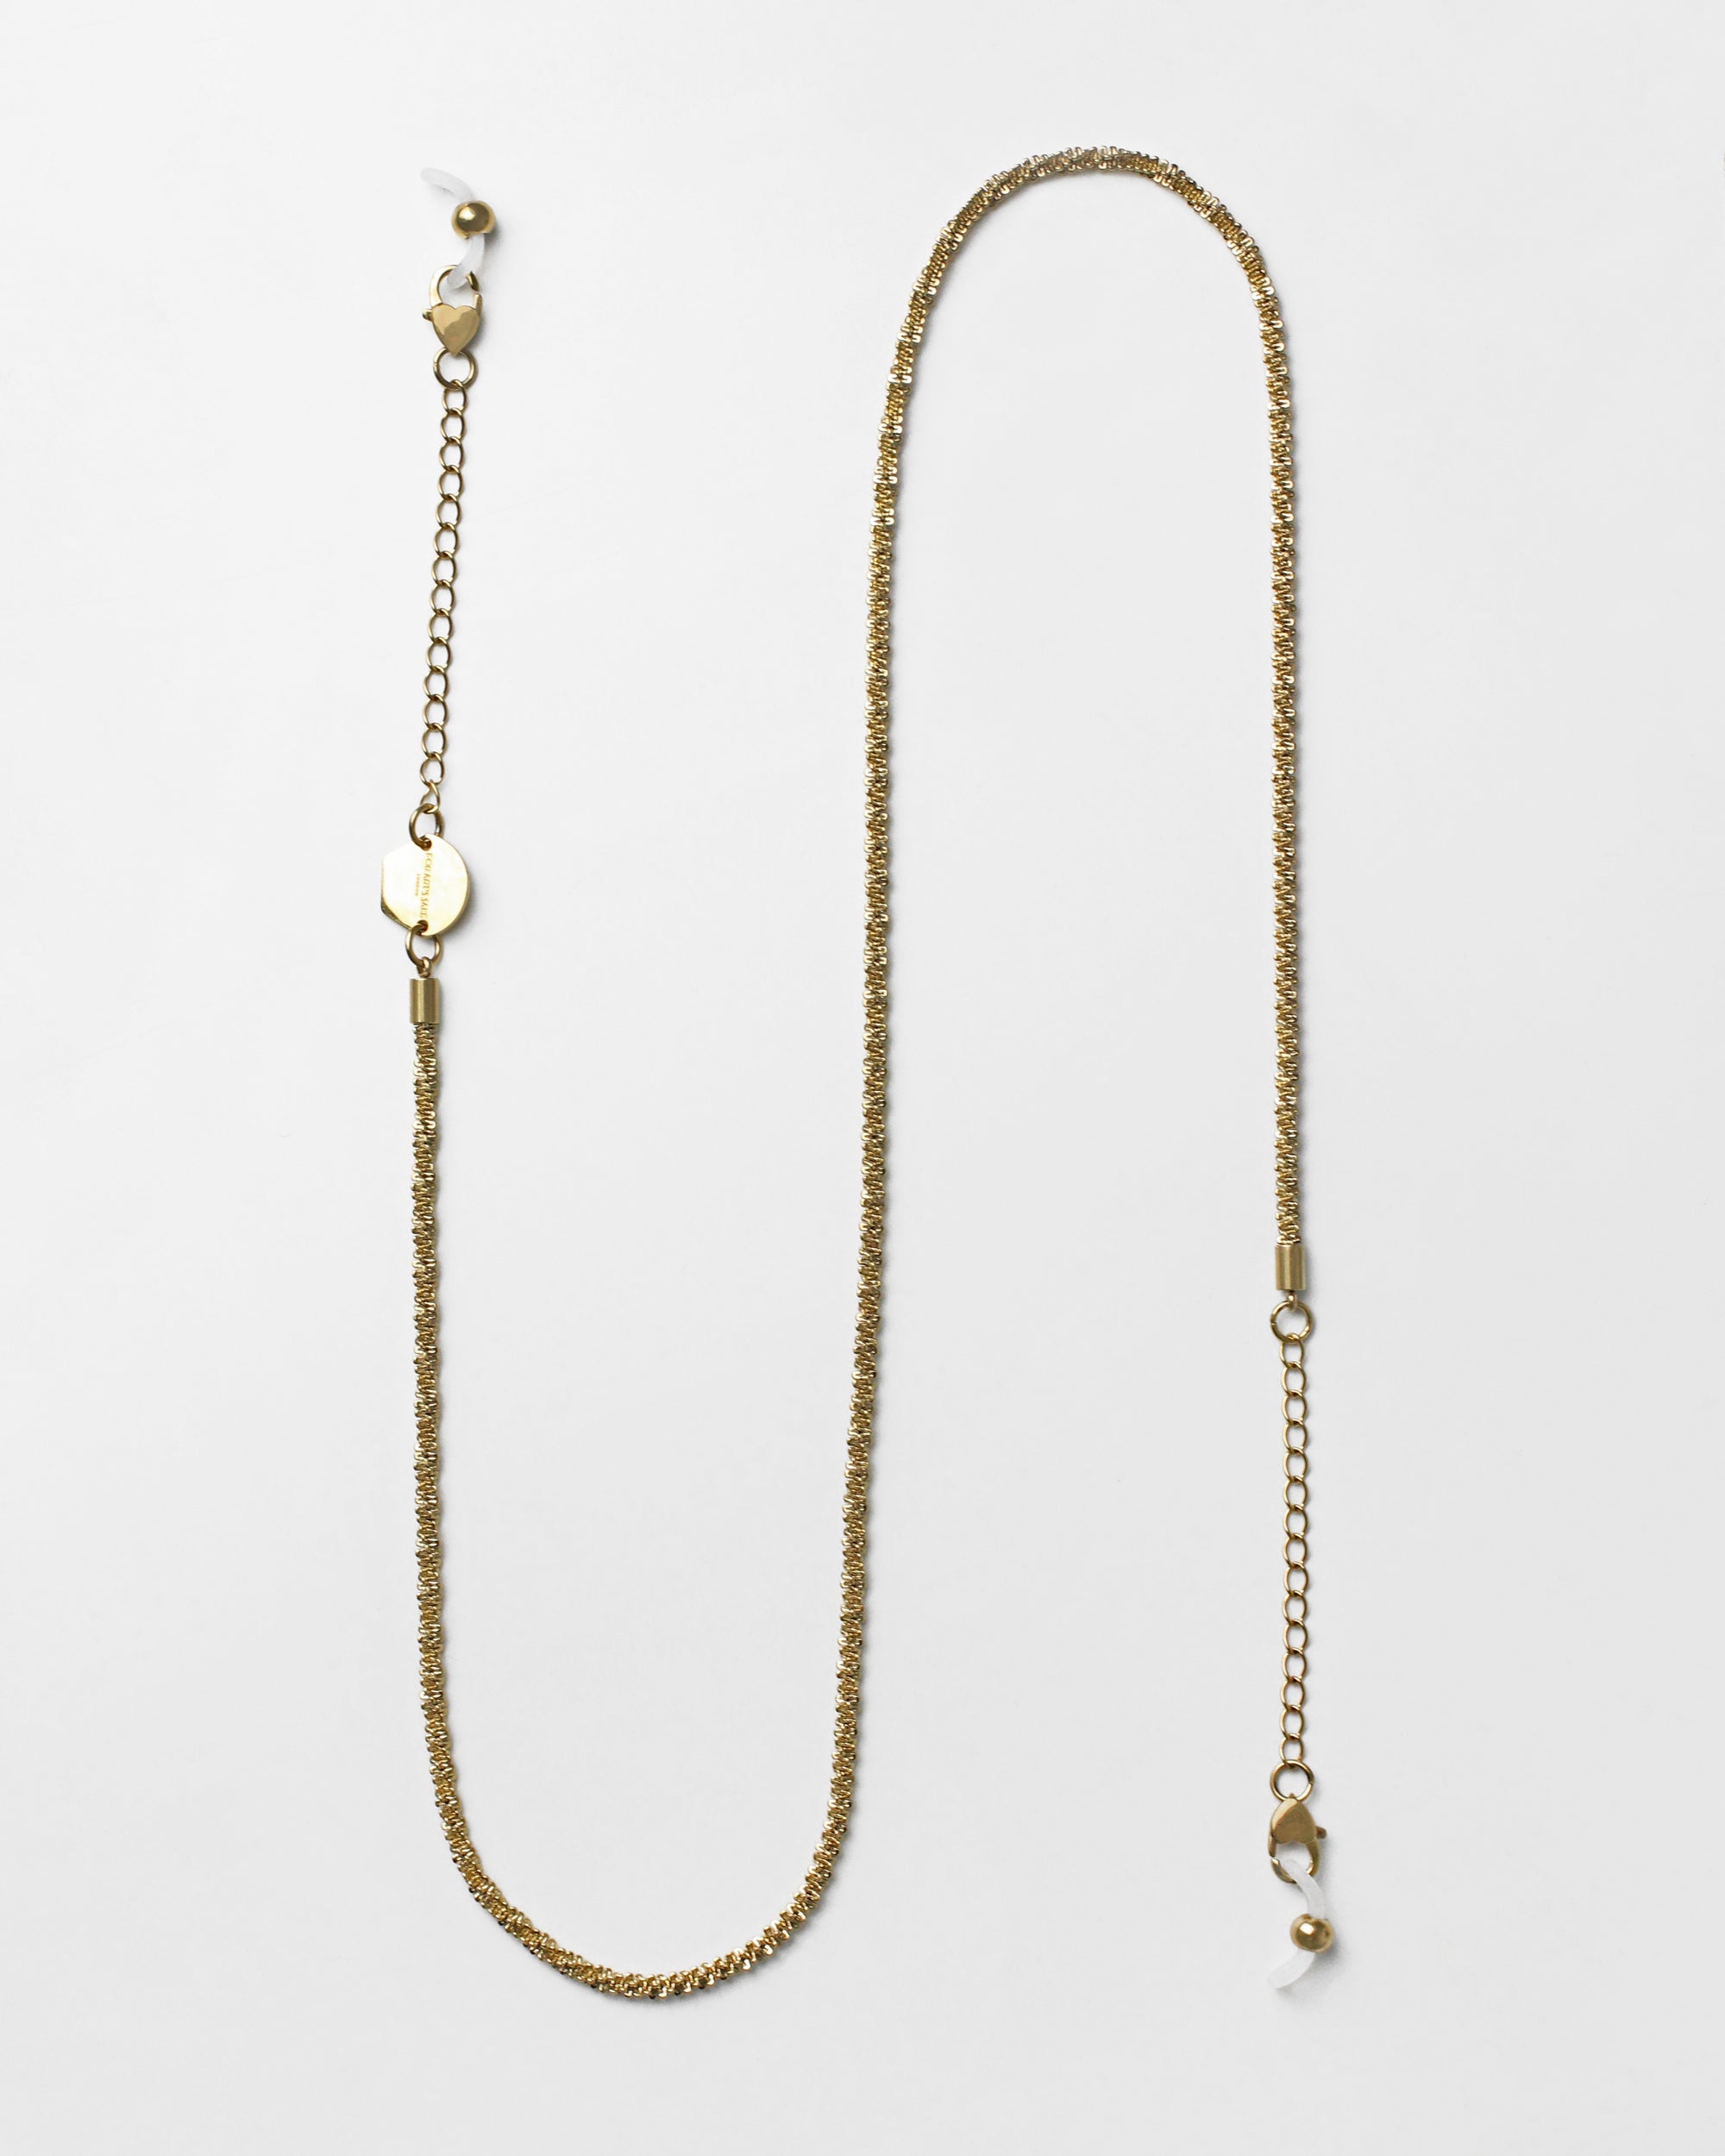 A delicate, 18k gold-plated **Mayfair Glasses Chain** with fine, intricate links and heart-shaped claw closures at both ends, designed to attach to eyeglasses. The chain also features adjustable extension links for a customizable fit. Displayed against a plain white background. Brand: **For Art&#39;s Sake®**